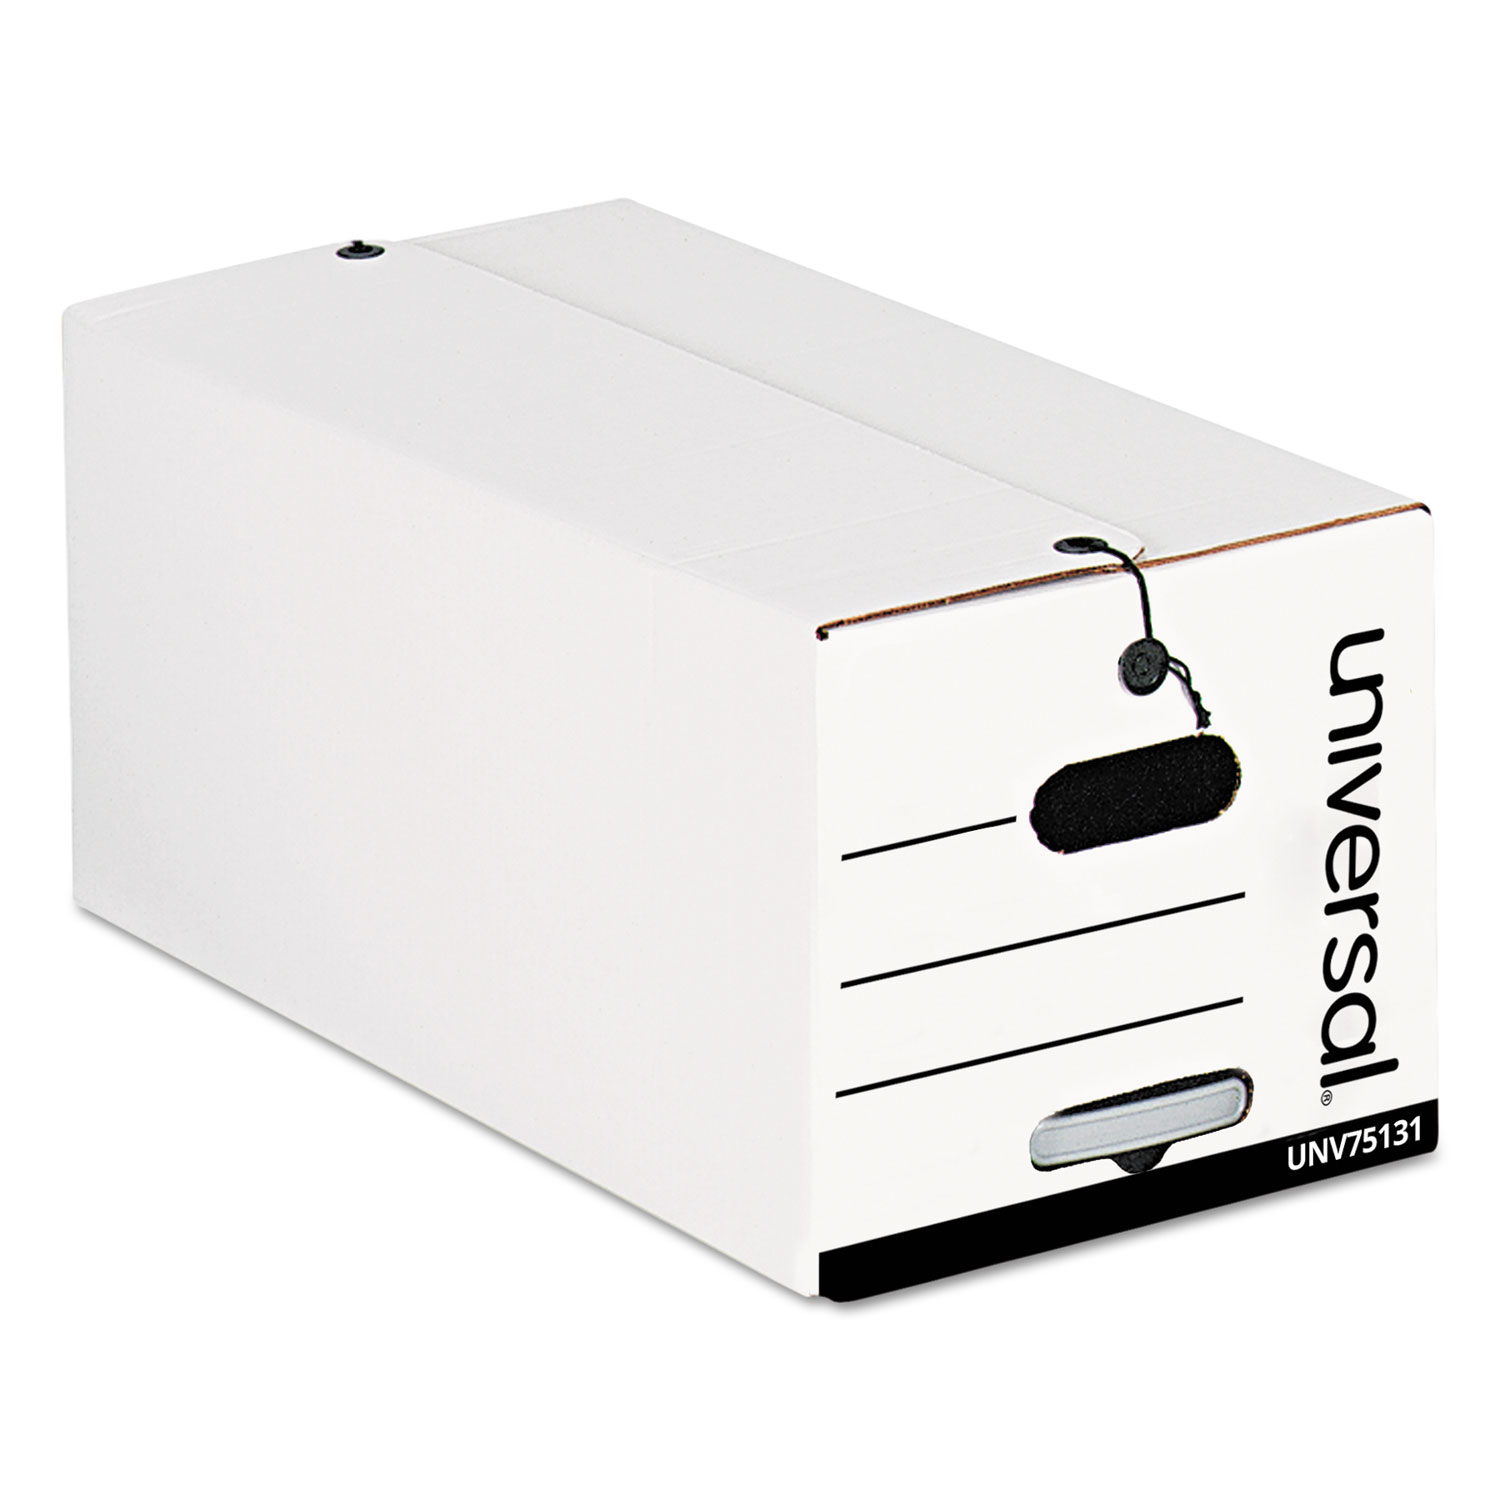  Universal 7513102 Deluxe Quick Set-up String-and-Button Boxes, Legal Files, White, 12/Carton (UNV75131) 